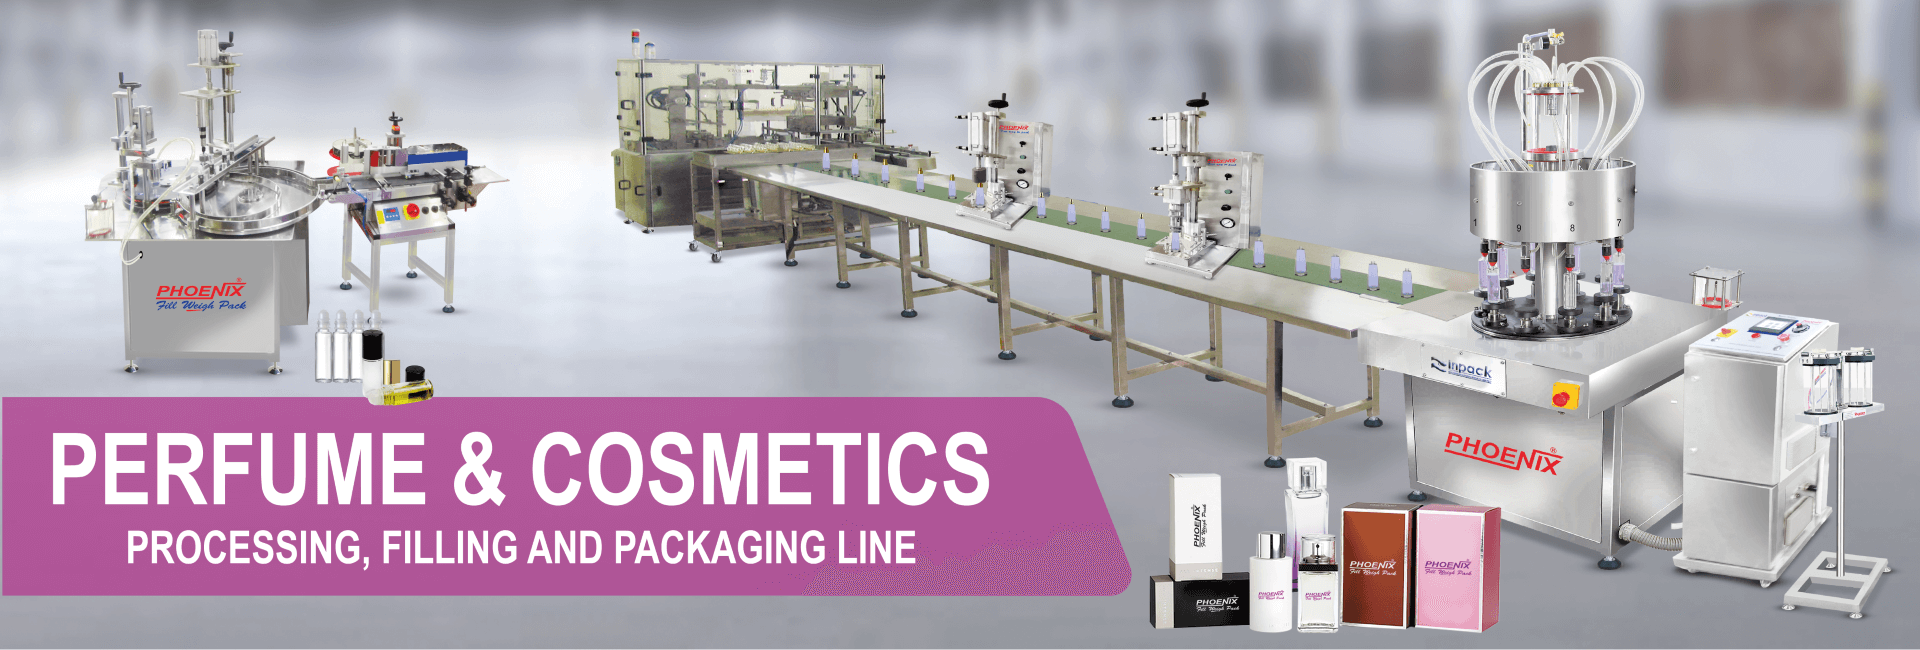 Perfume & Cosmetics, Processing, Filling and Packaging Line - Desktop